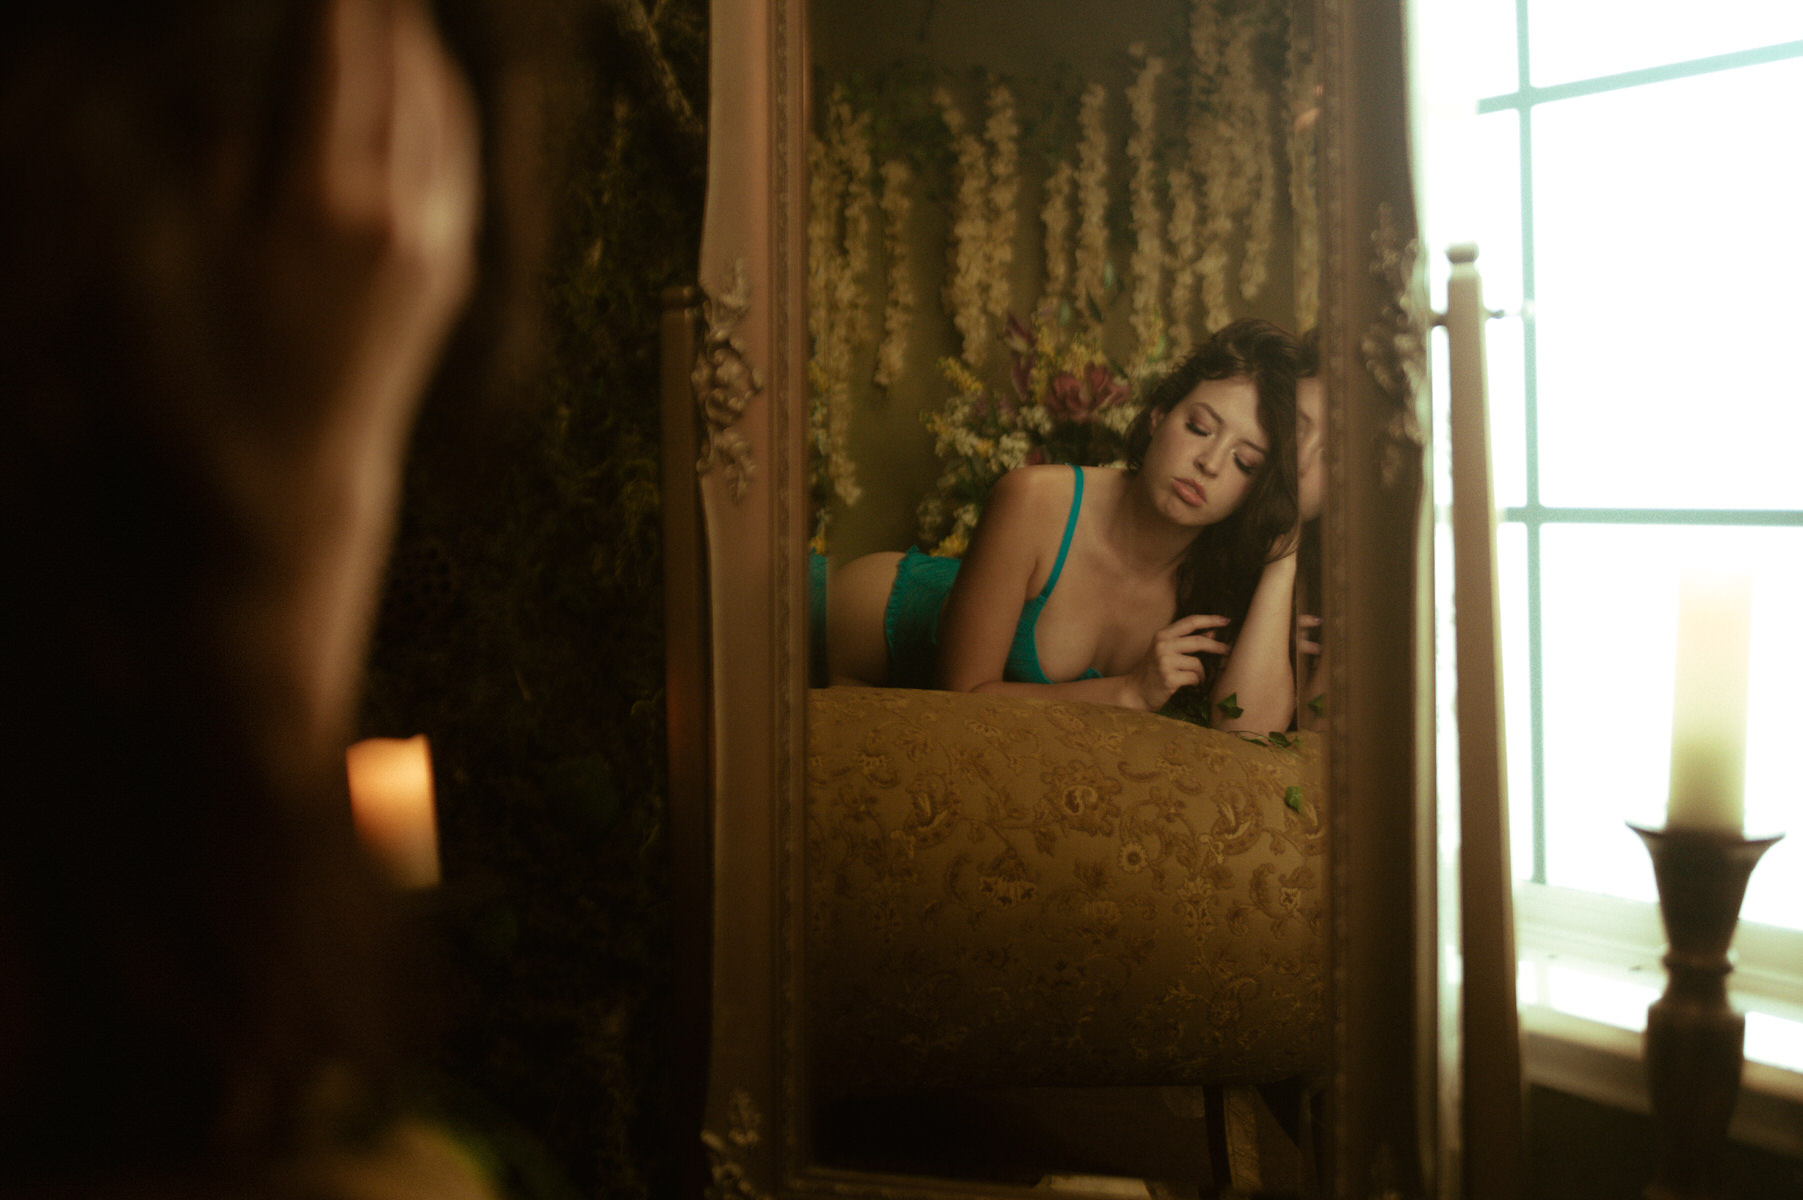 Dallas Boudoir Photography: A woman savoring her reflection on a bed.